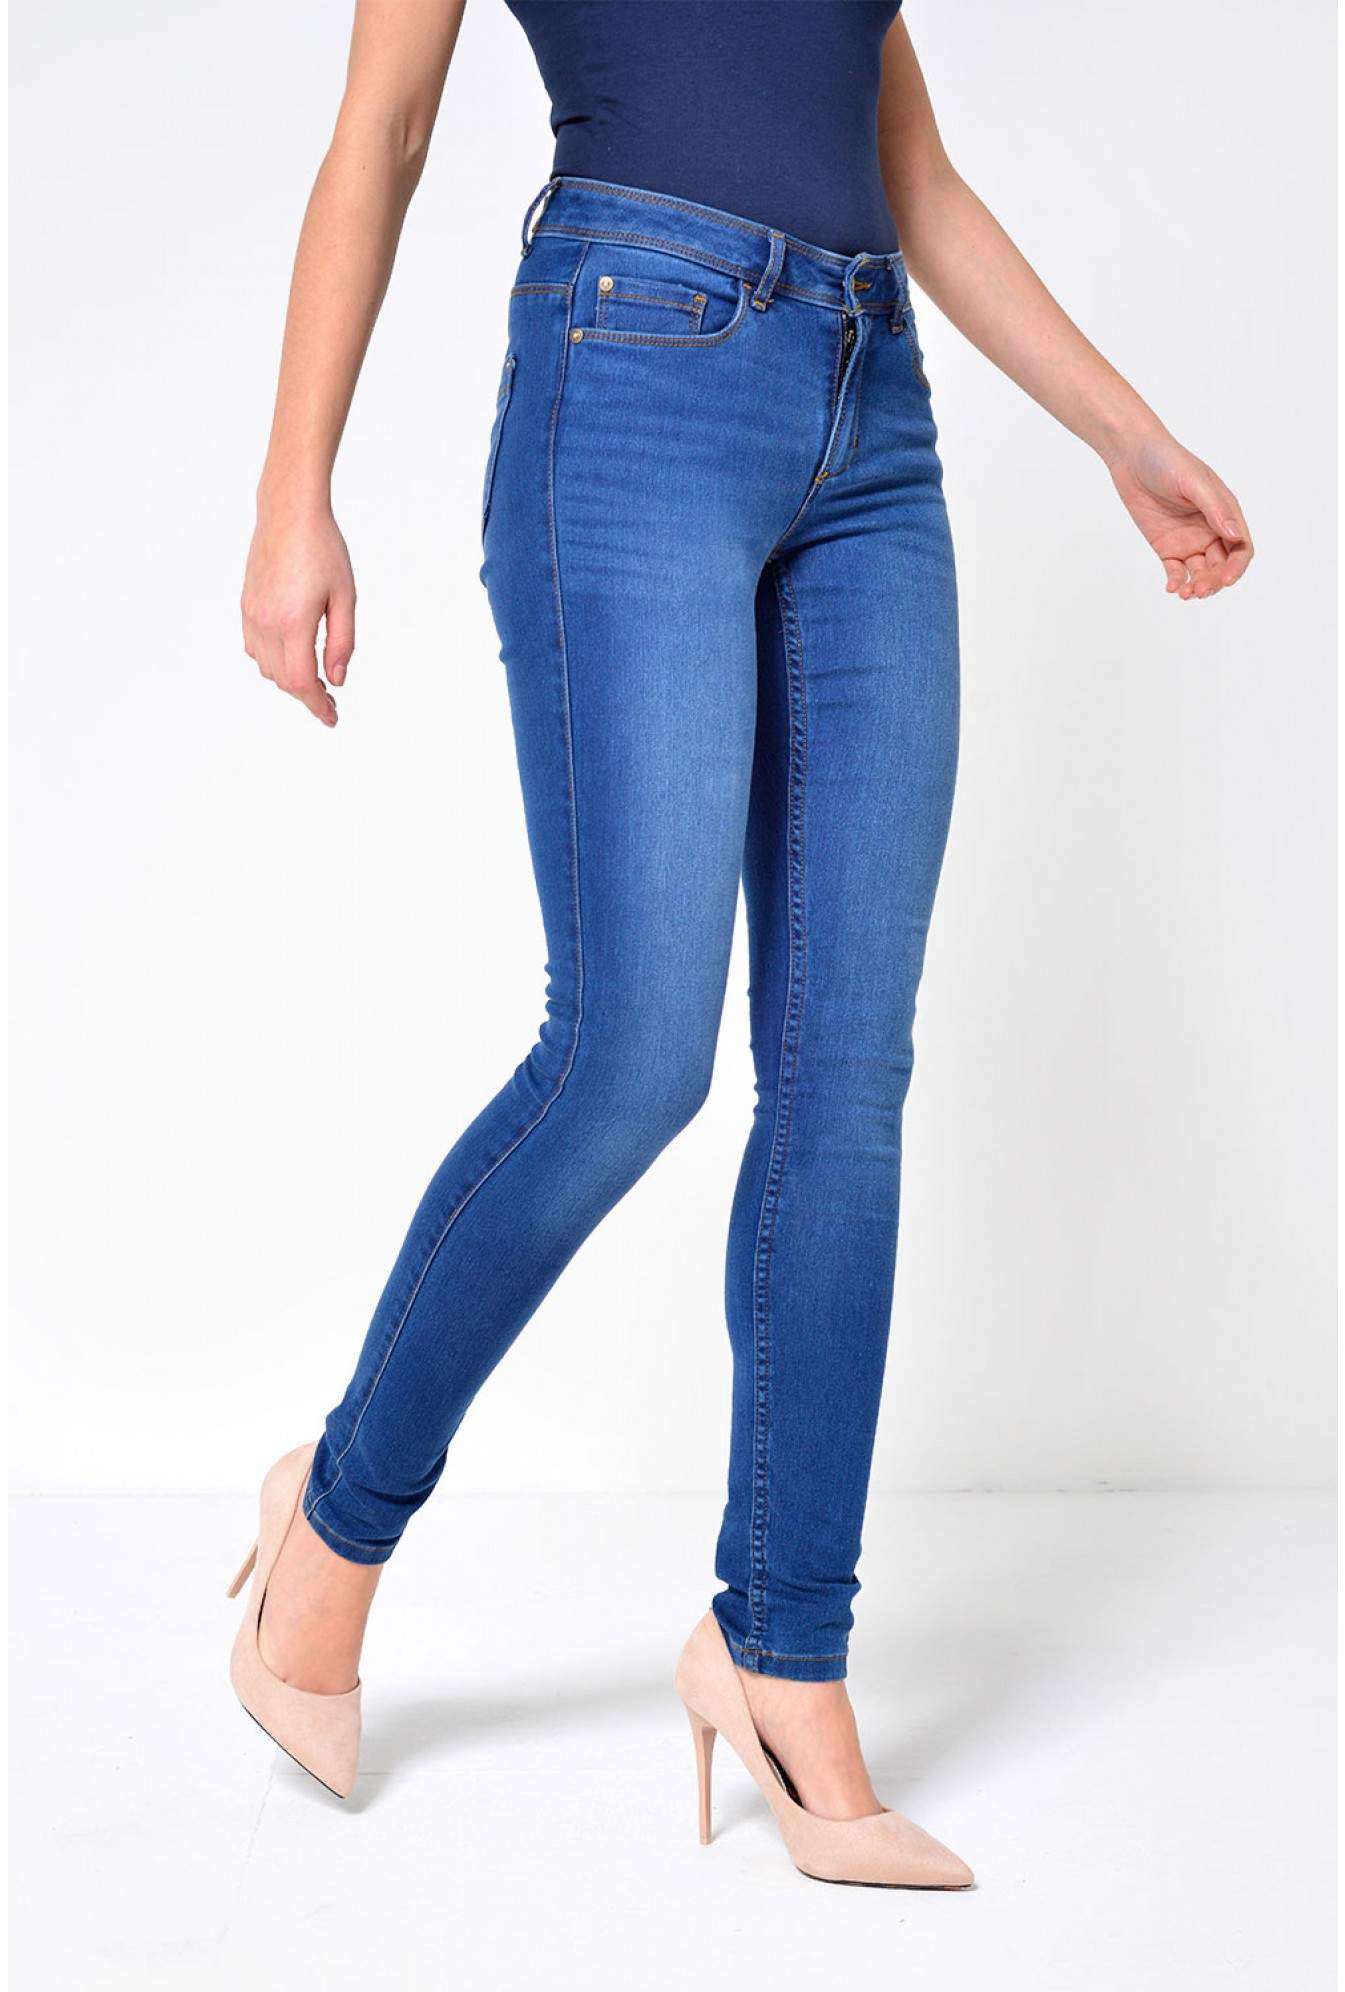 Only Ultimate Regular Length Soft Skinny Jeans | iCLOTHING